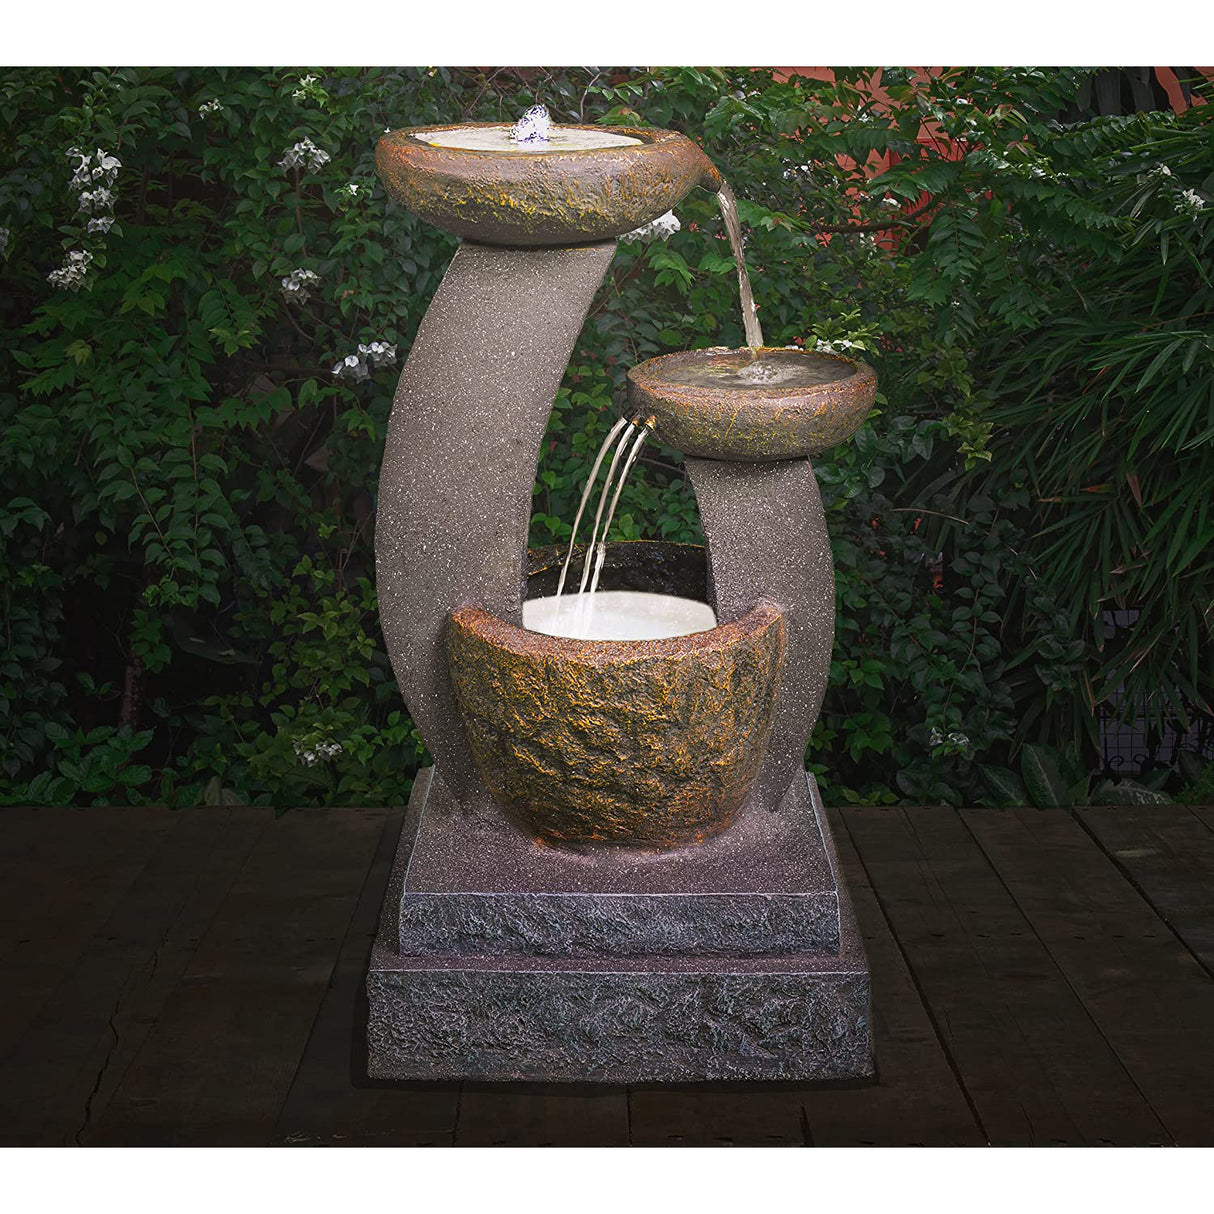 MDA Designs Shinto Garden Water Feature with LED Lighting